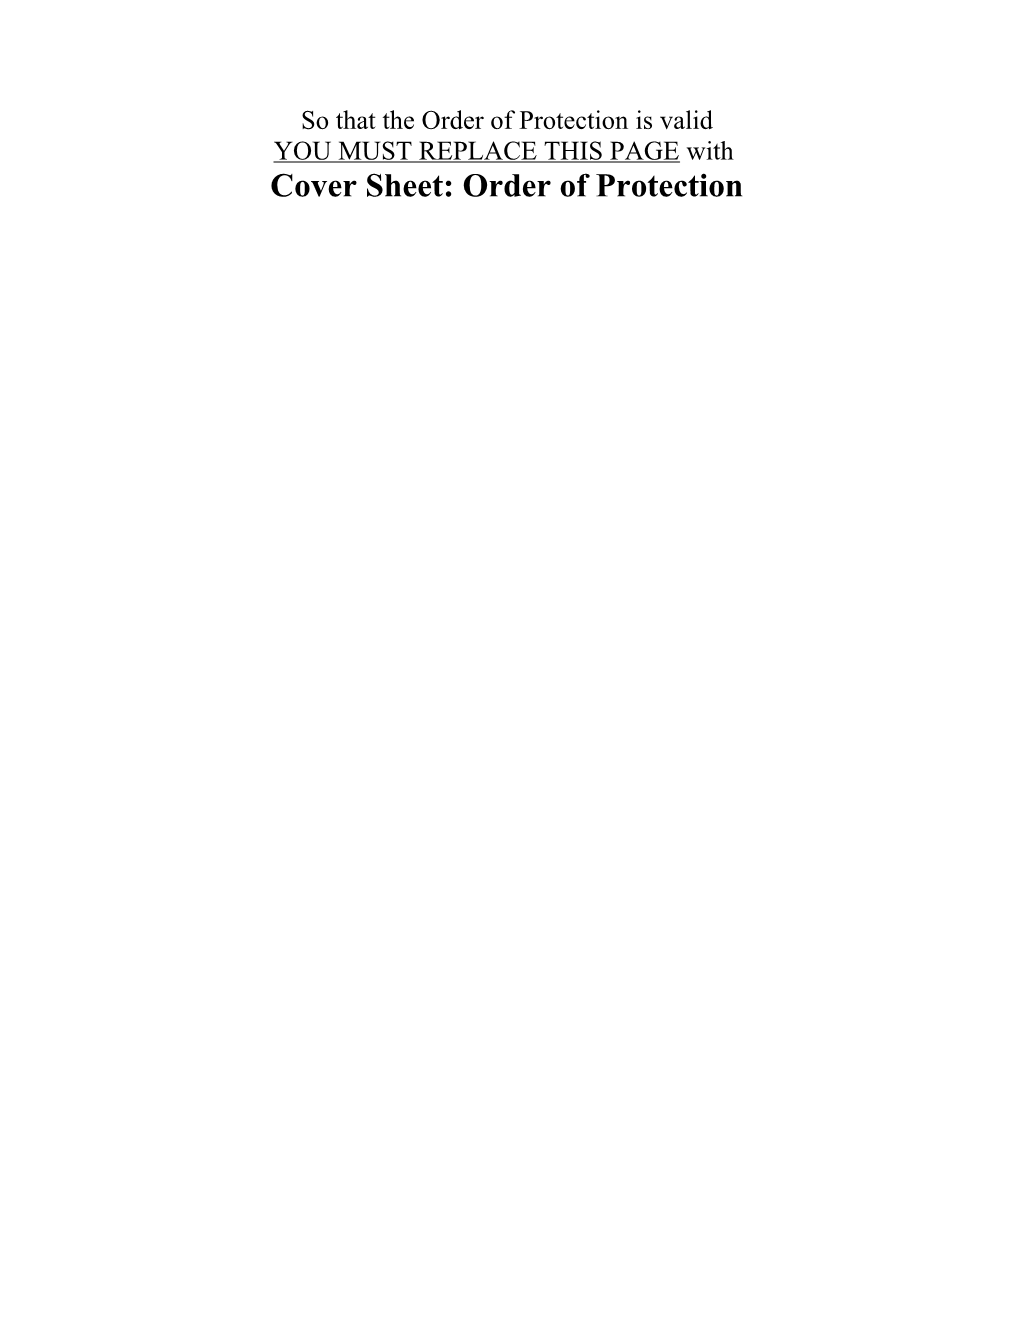 Cover Sheet: Order of Protection s1